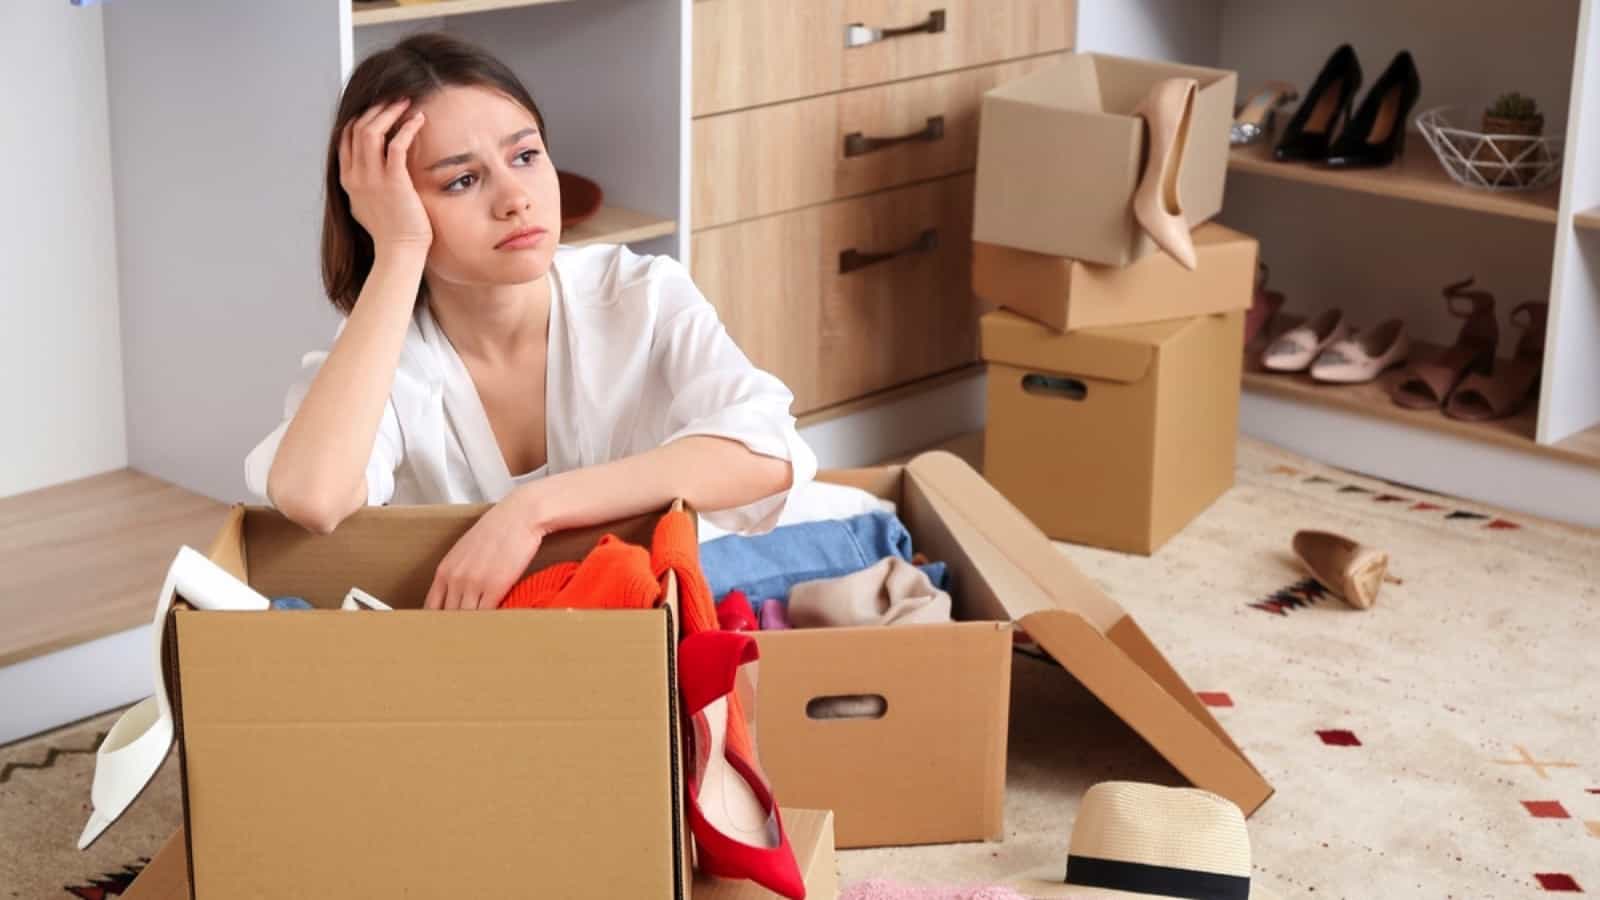 Upset young woman with wardrobe box